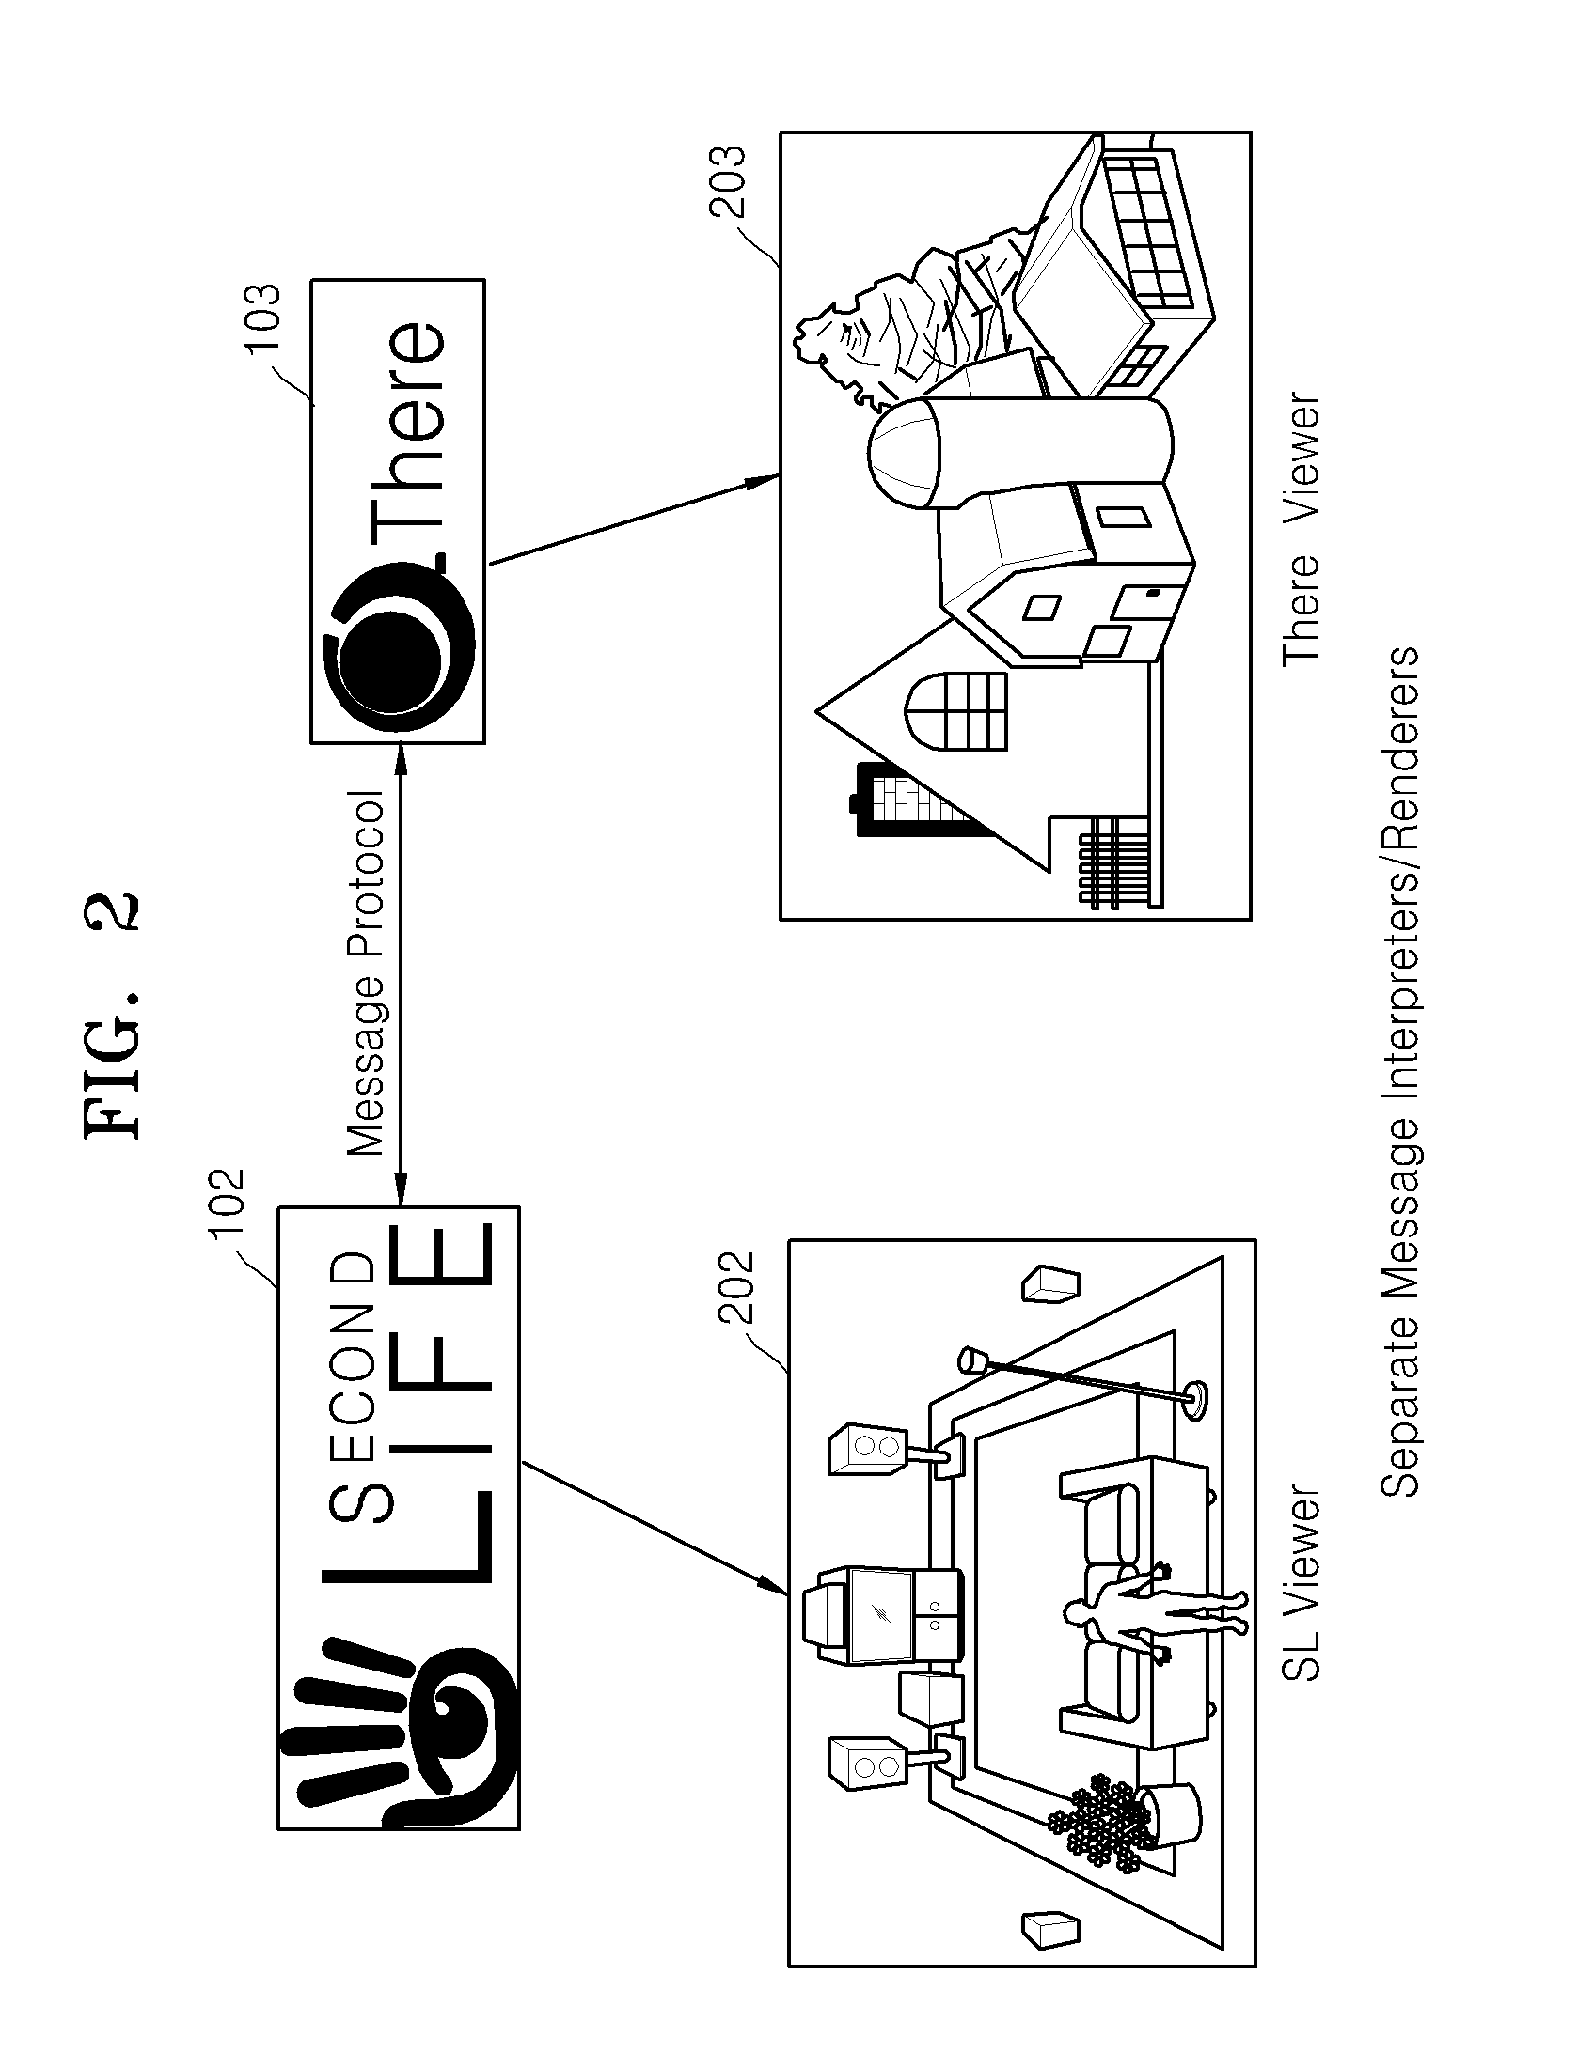 Apparatus and method of interworking between virtual reality services